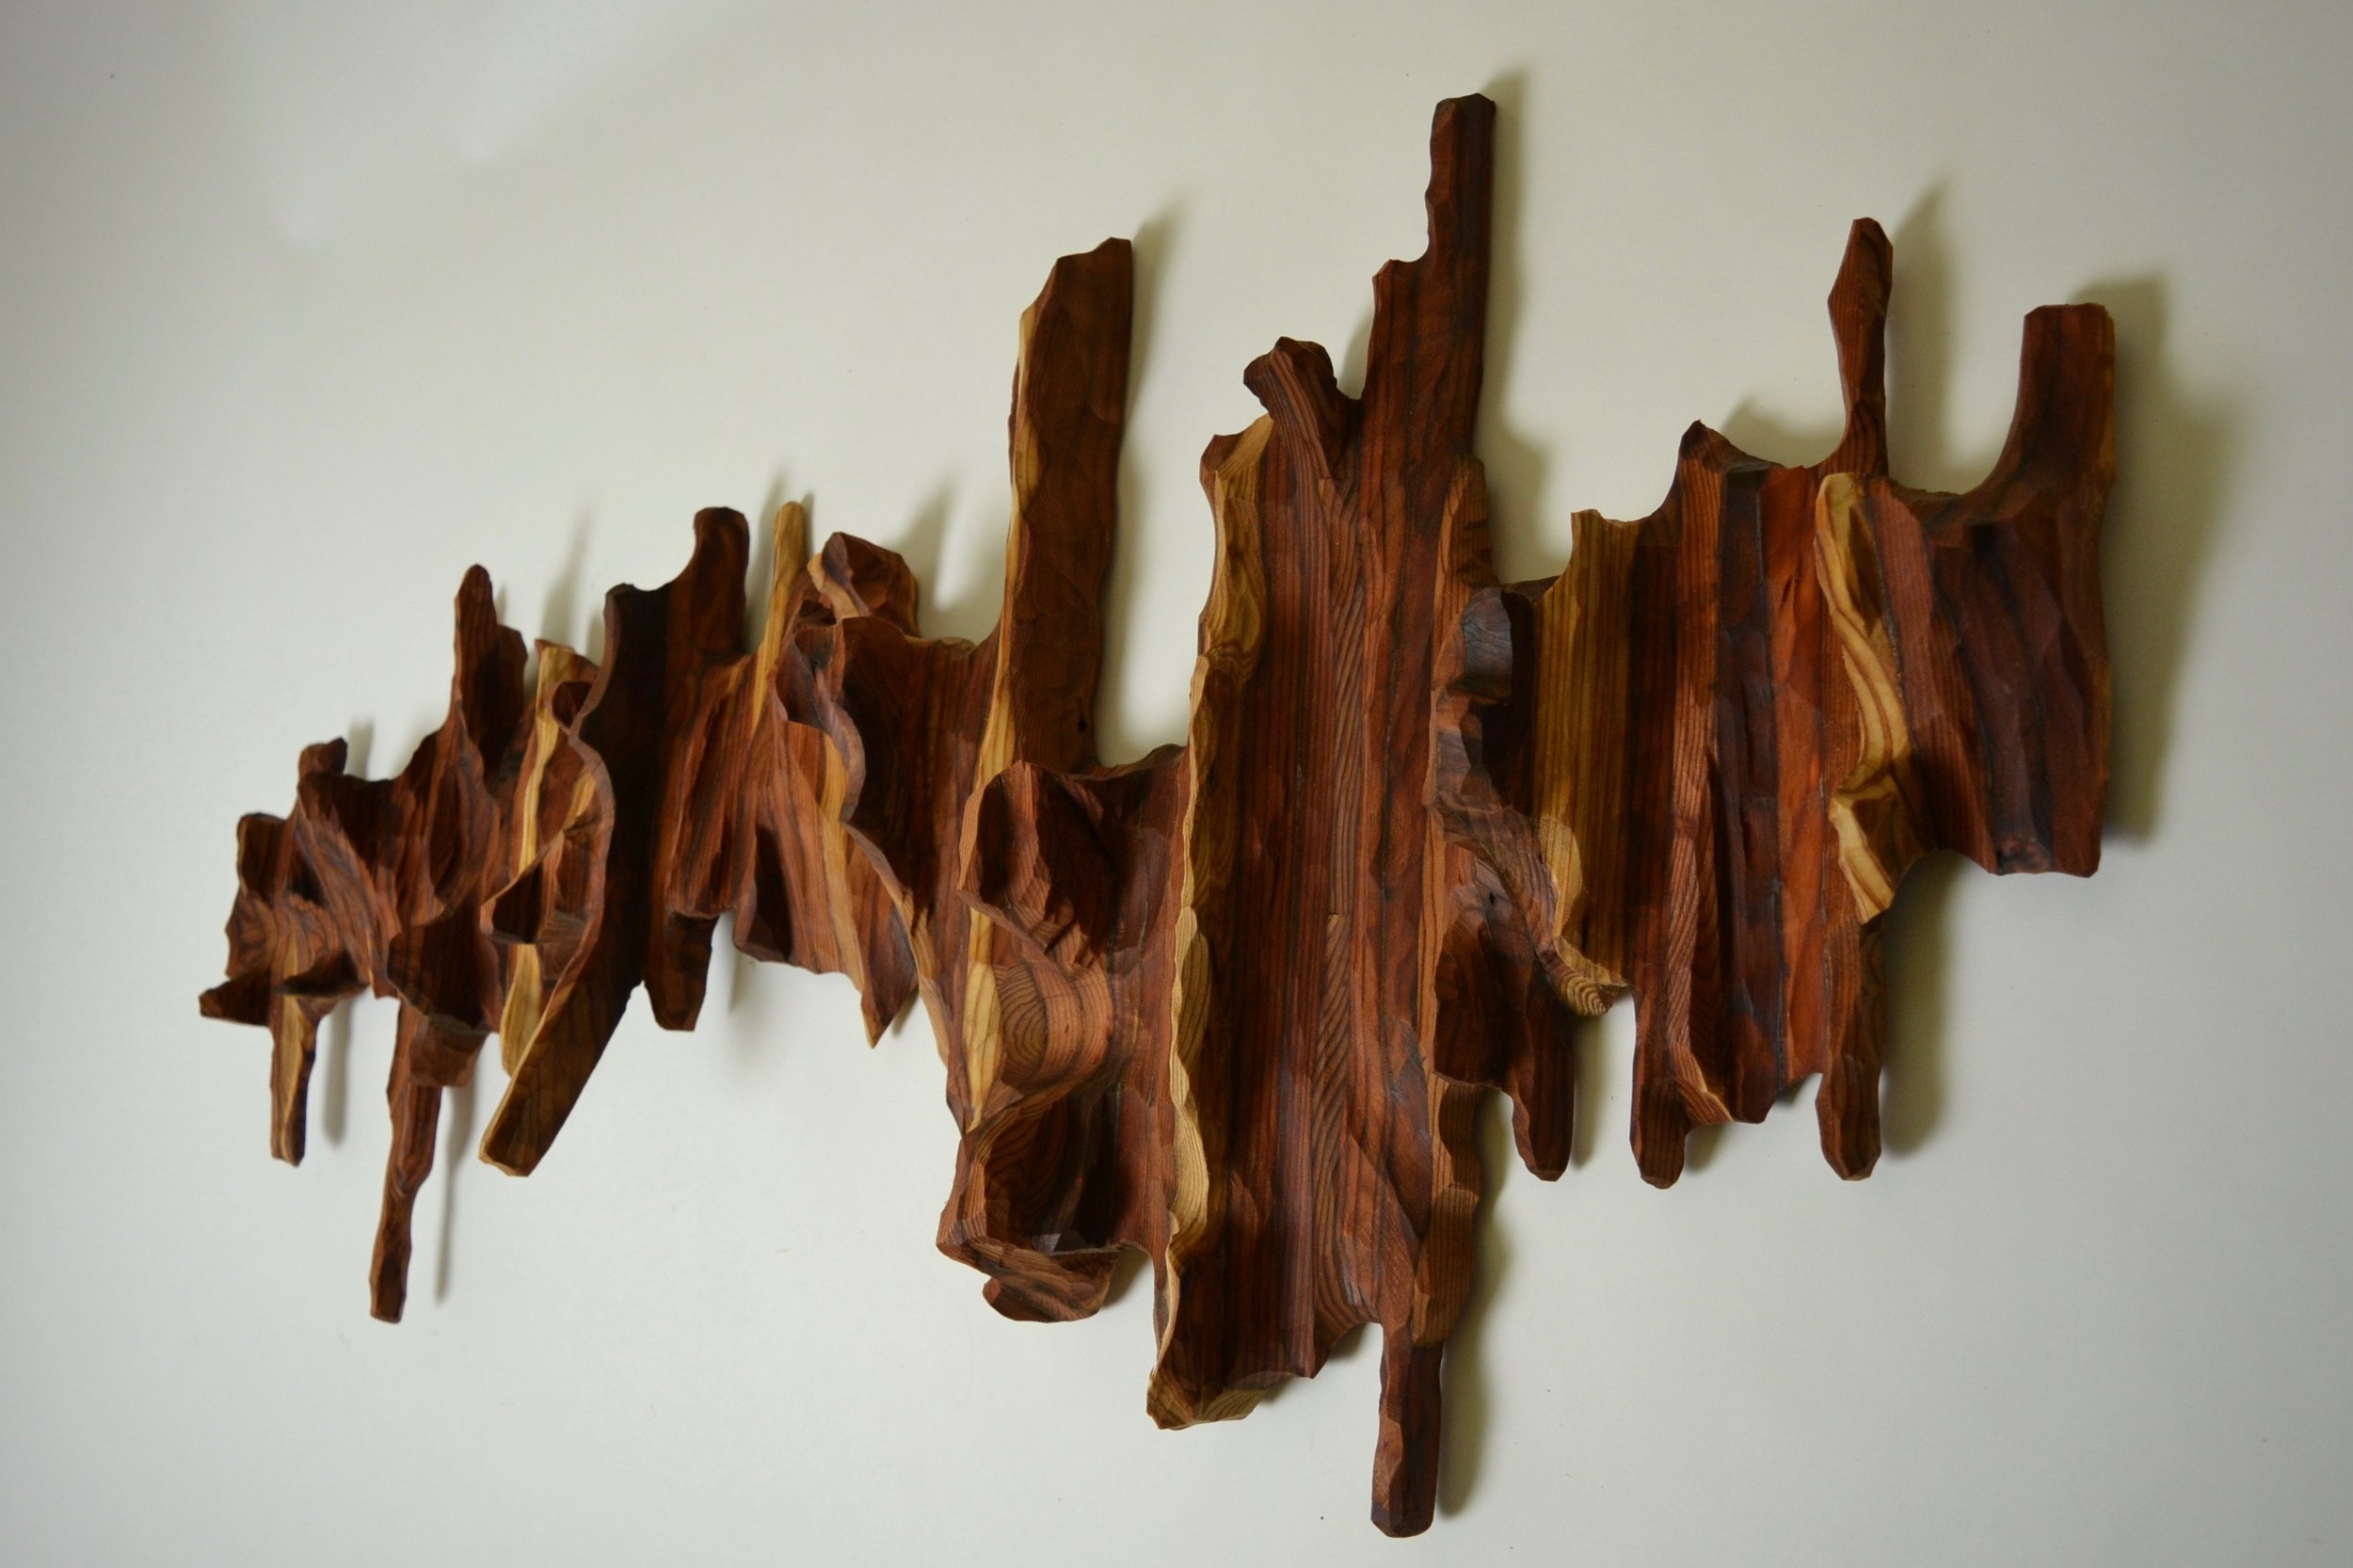 Abstract Wall Art from Reclaimed Wood - Nature series | Lutz Art Design